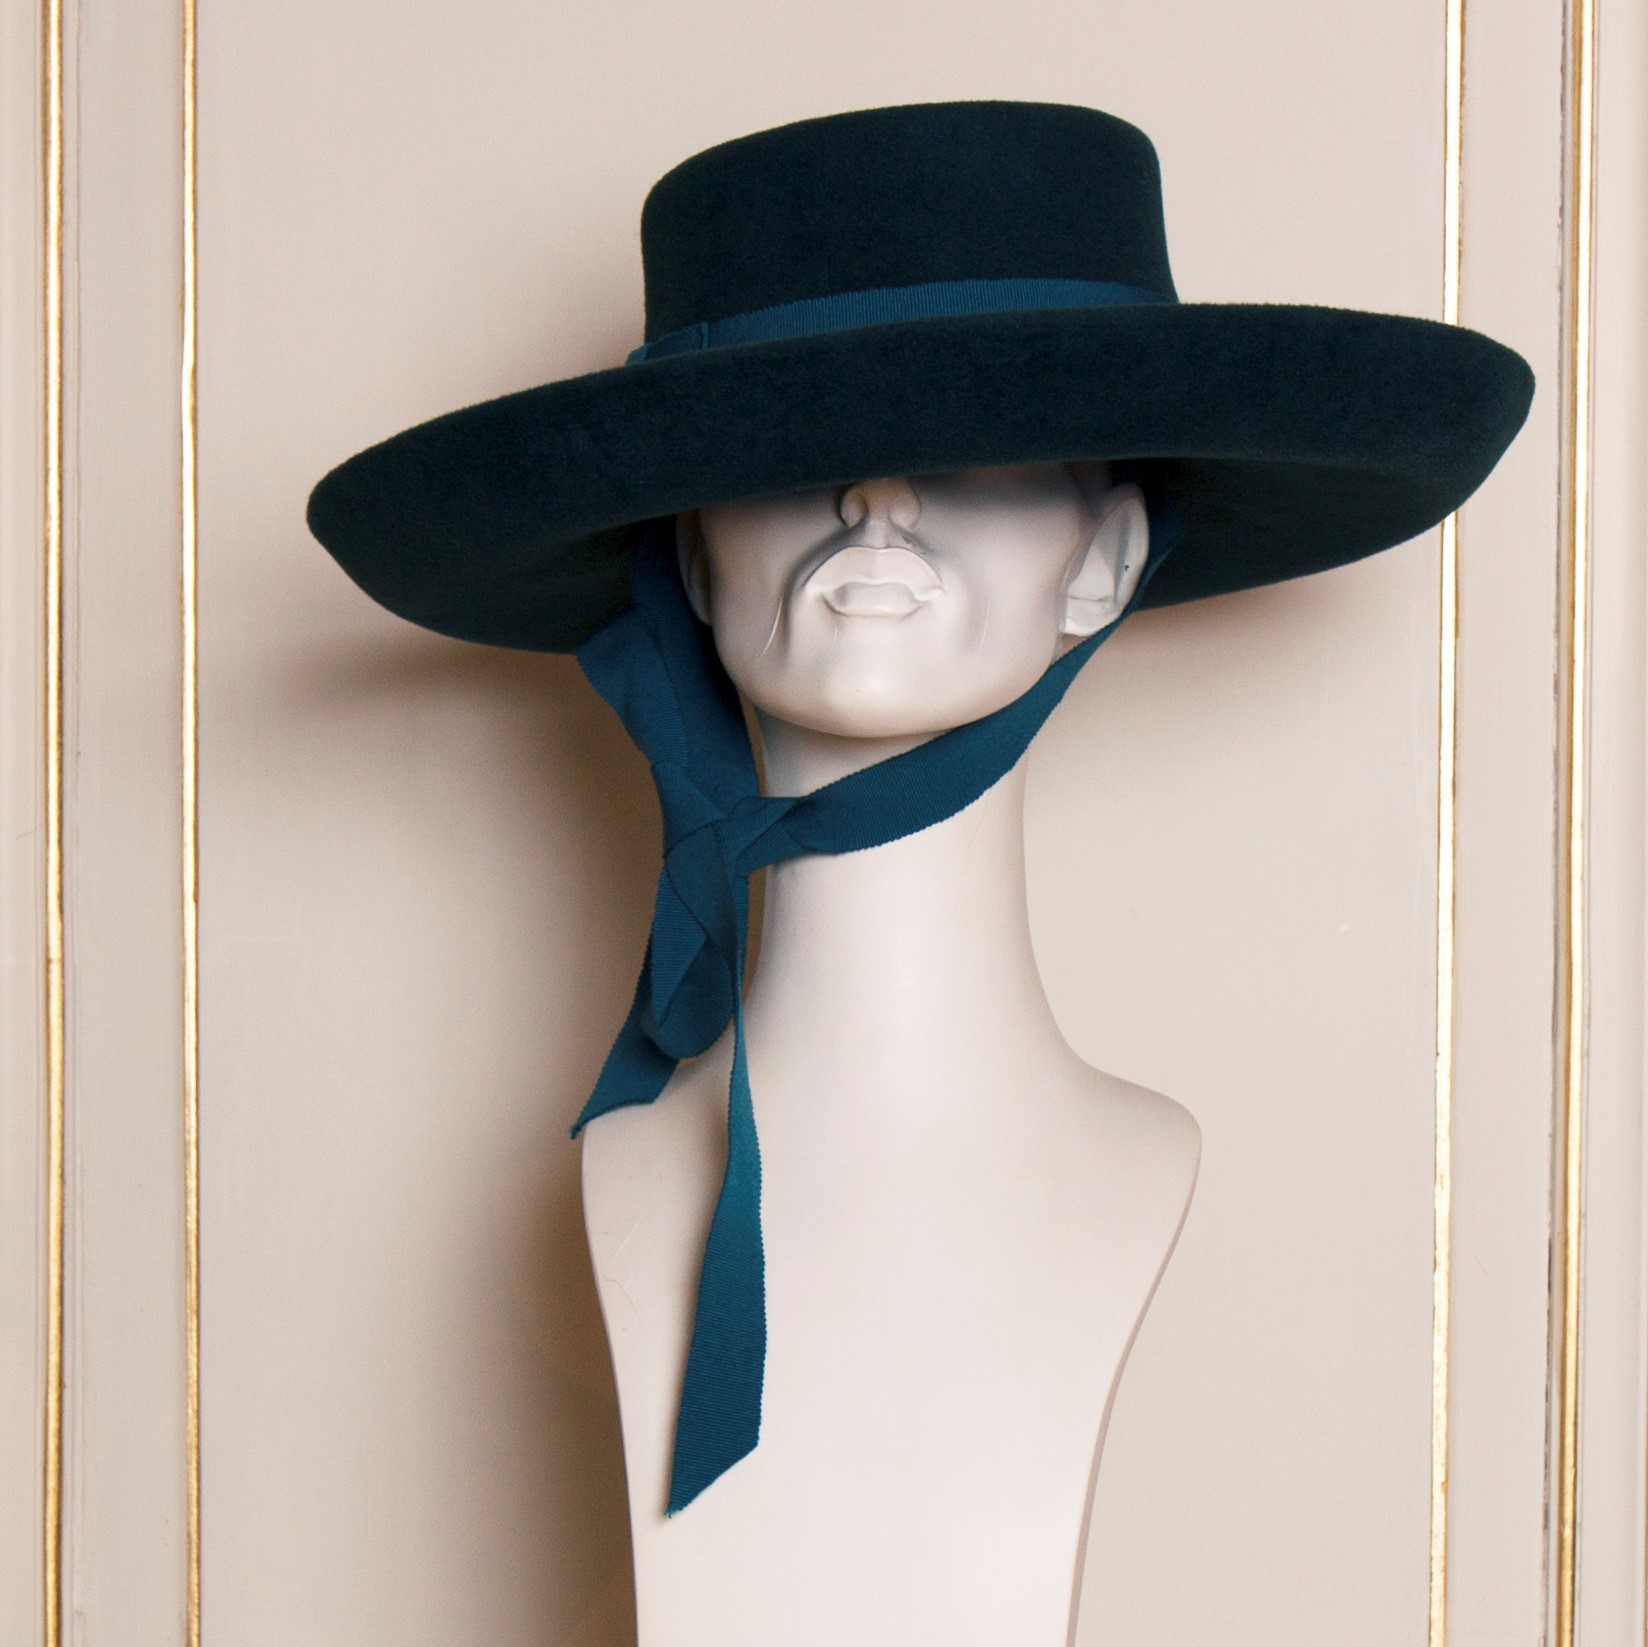 Fashionable Cowboy in teal velours felt